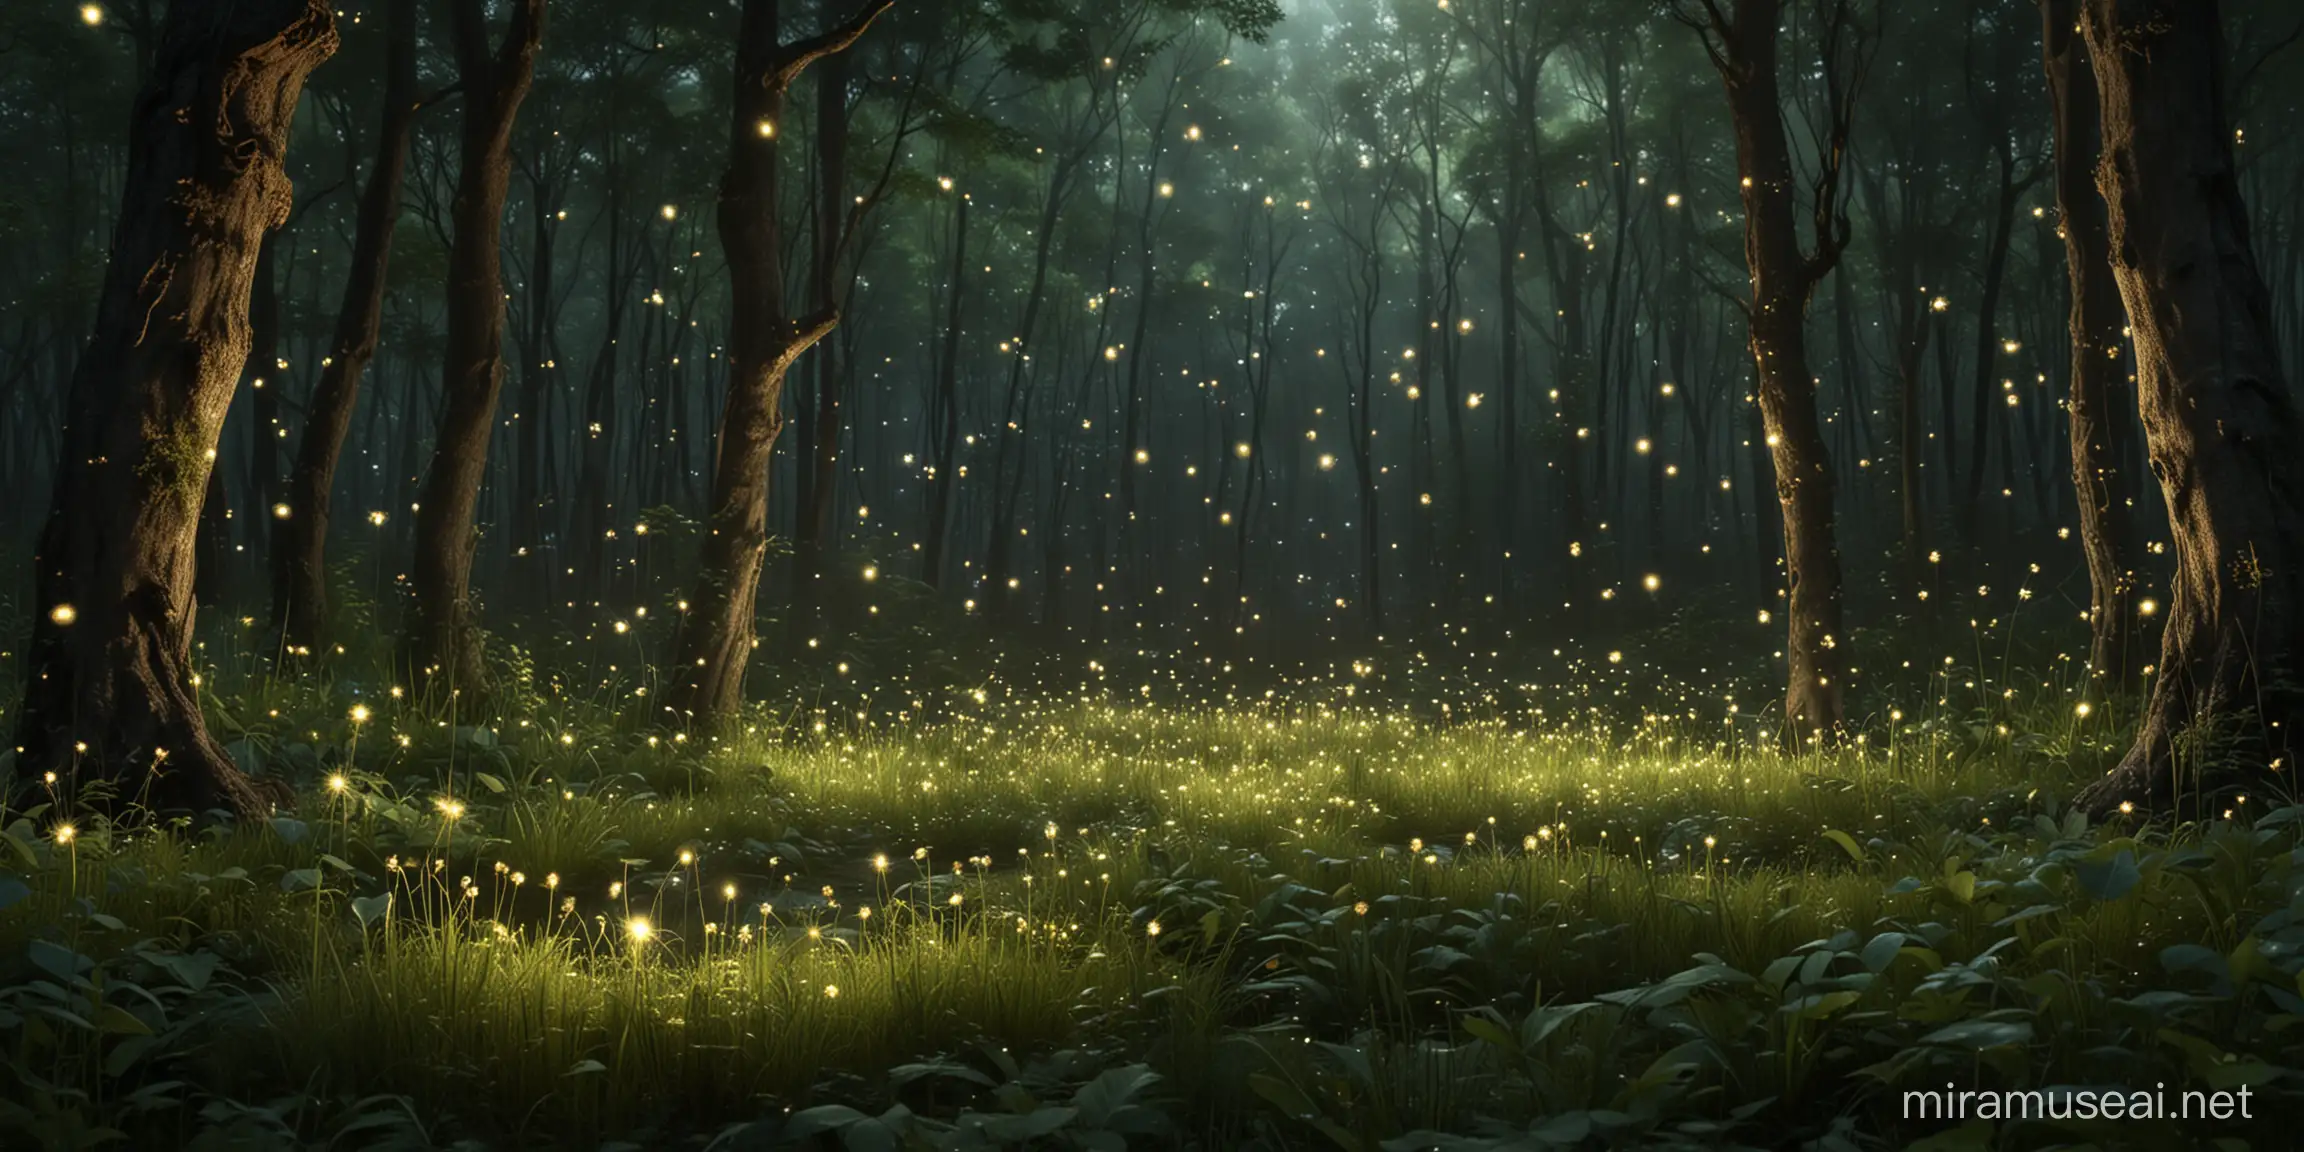 Create an image where the small luminous spheres mimic fireflies in an enchanted forest, radiating a soft and magical glow throughout the scene. very small fairies flying, wide screen